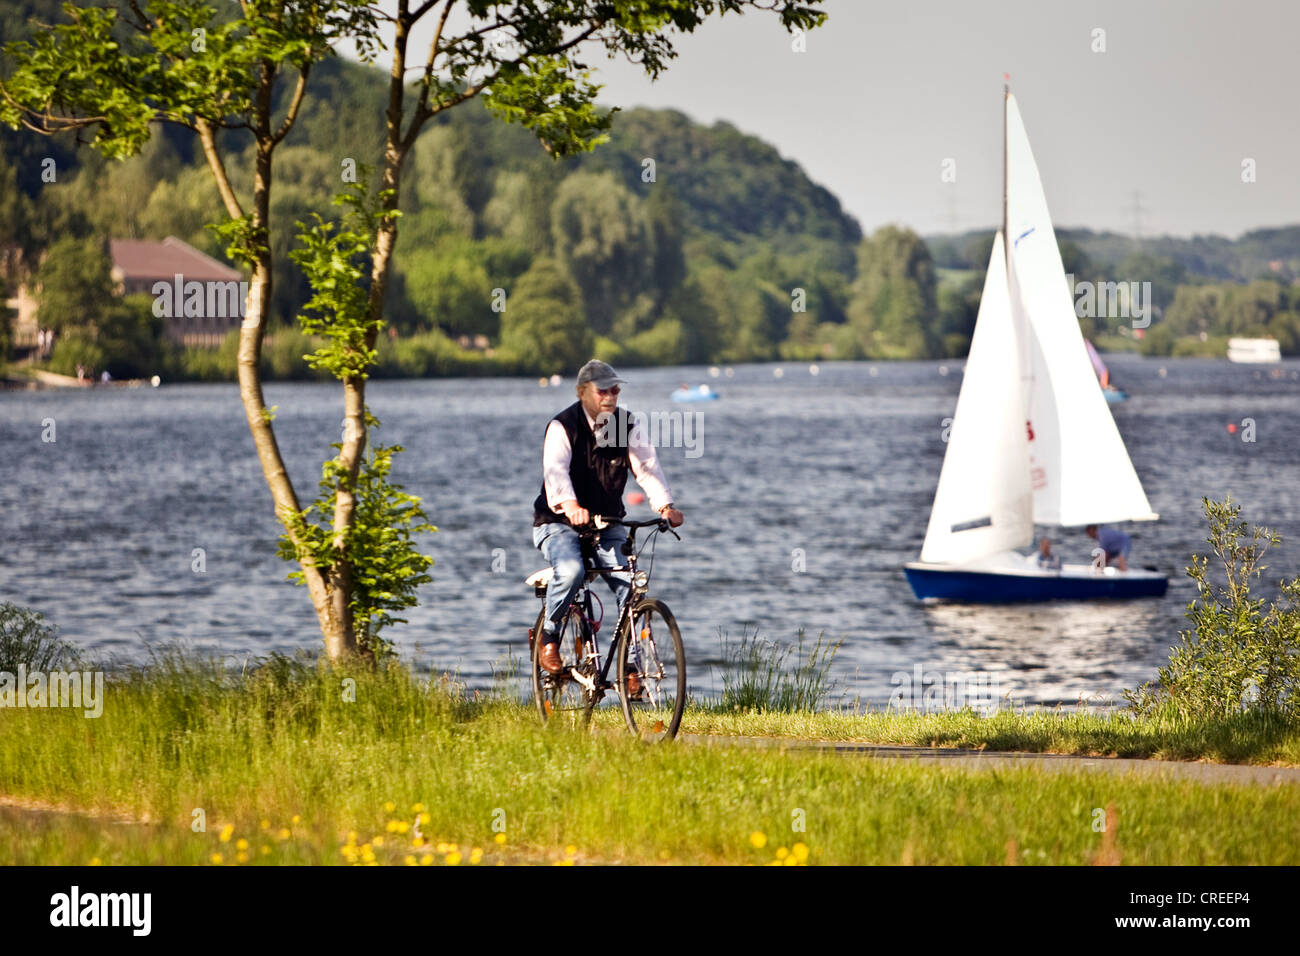 man on a bike at the Kemnader Stausee with sailing boat, Germany, North Rhine-Westphalia, Ruhr Area, Witten Stock Photo